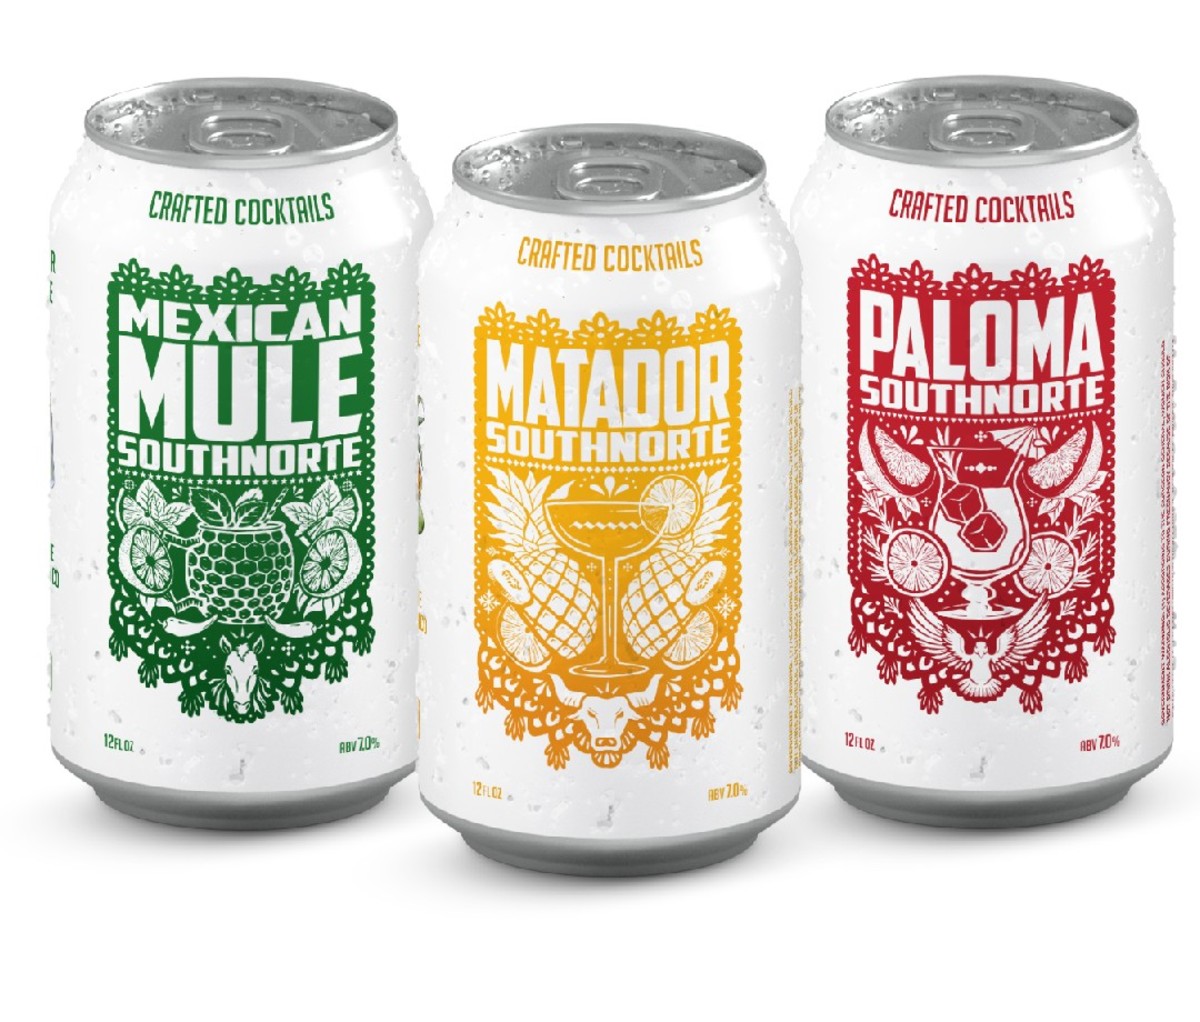 Three cans of SouthNorte Crafted Cocktails